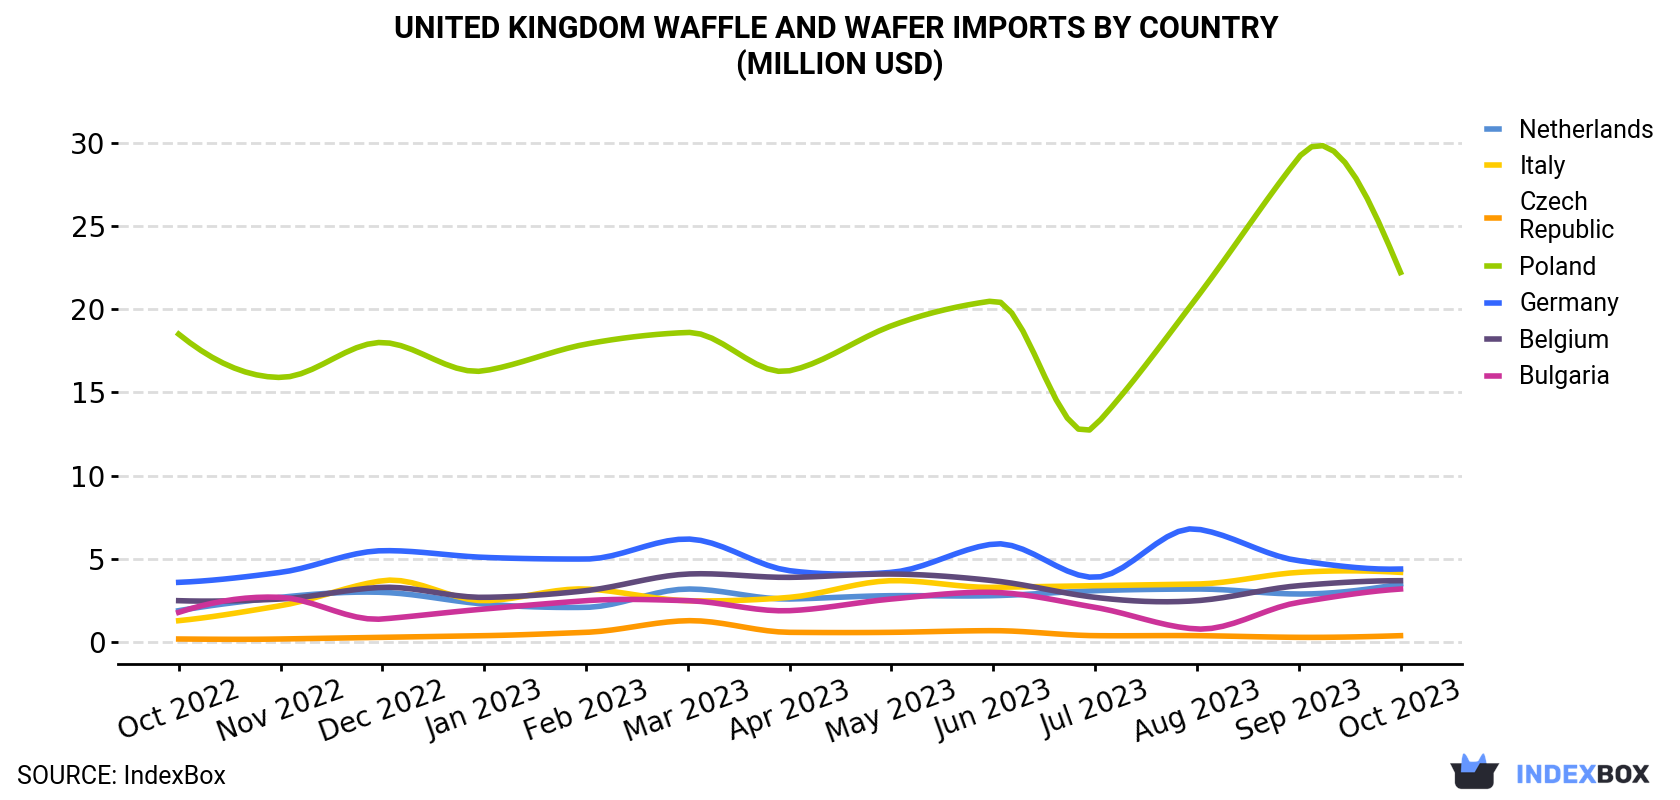 United Kingdom Waffle and Wafer Imports By Country (Million USD)